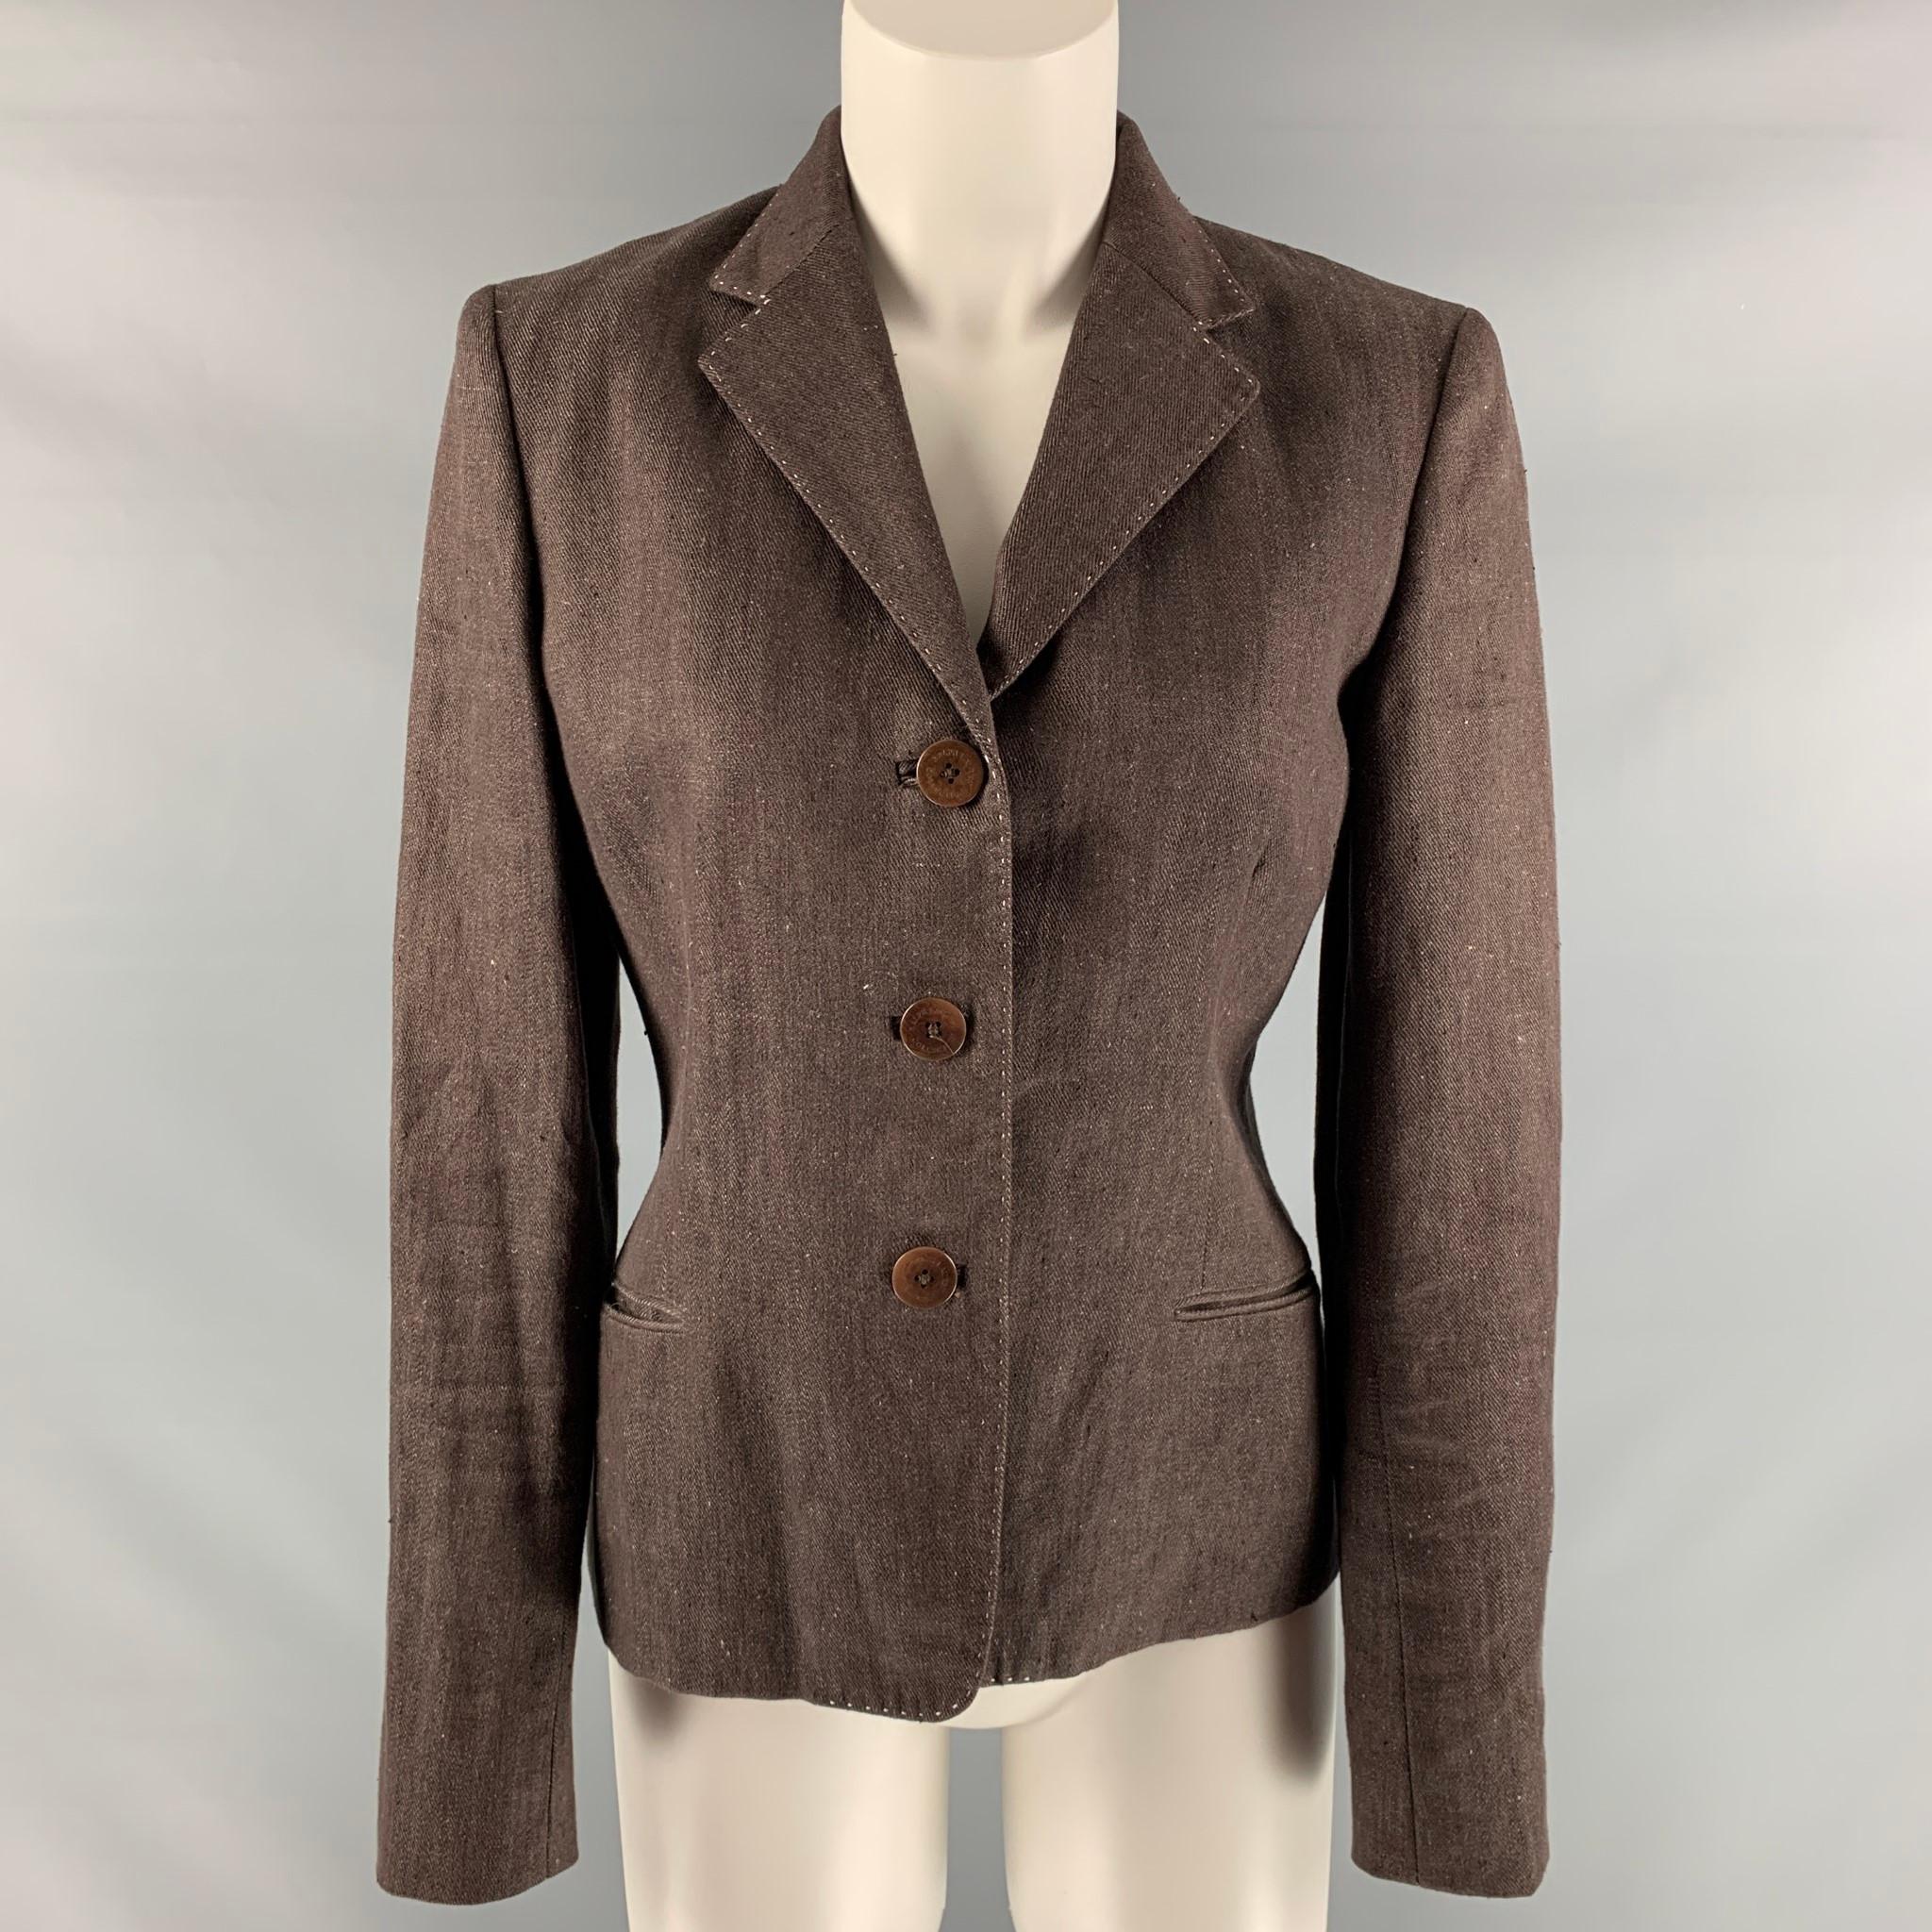 RALPH LAUREN 'COLLECTION by' blazer comes in brown linen twill fabric featuring a button down closure, two slit pockets at front and contrast top stitch details. Made in USA.

Excellent Pre-Owned Condition.
Marked: 6

Measurements:

Shoulder: 15.5